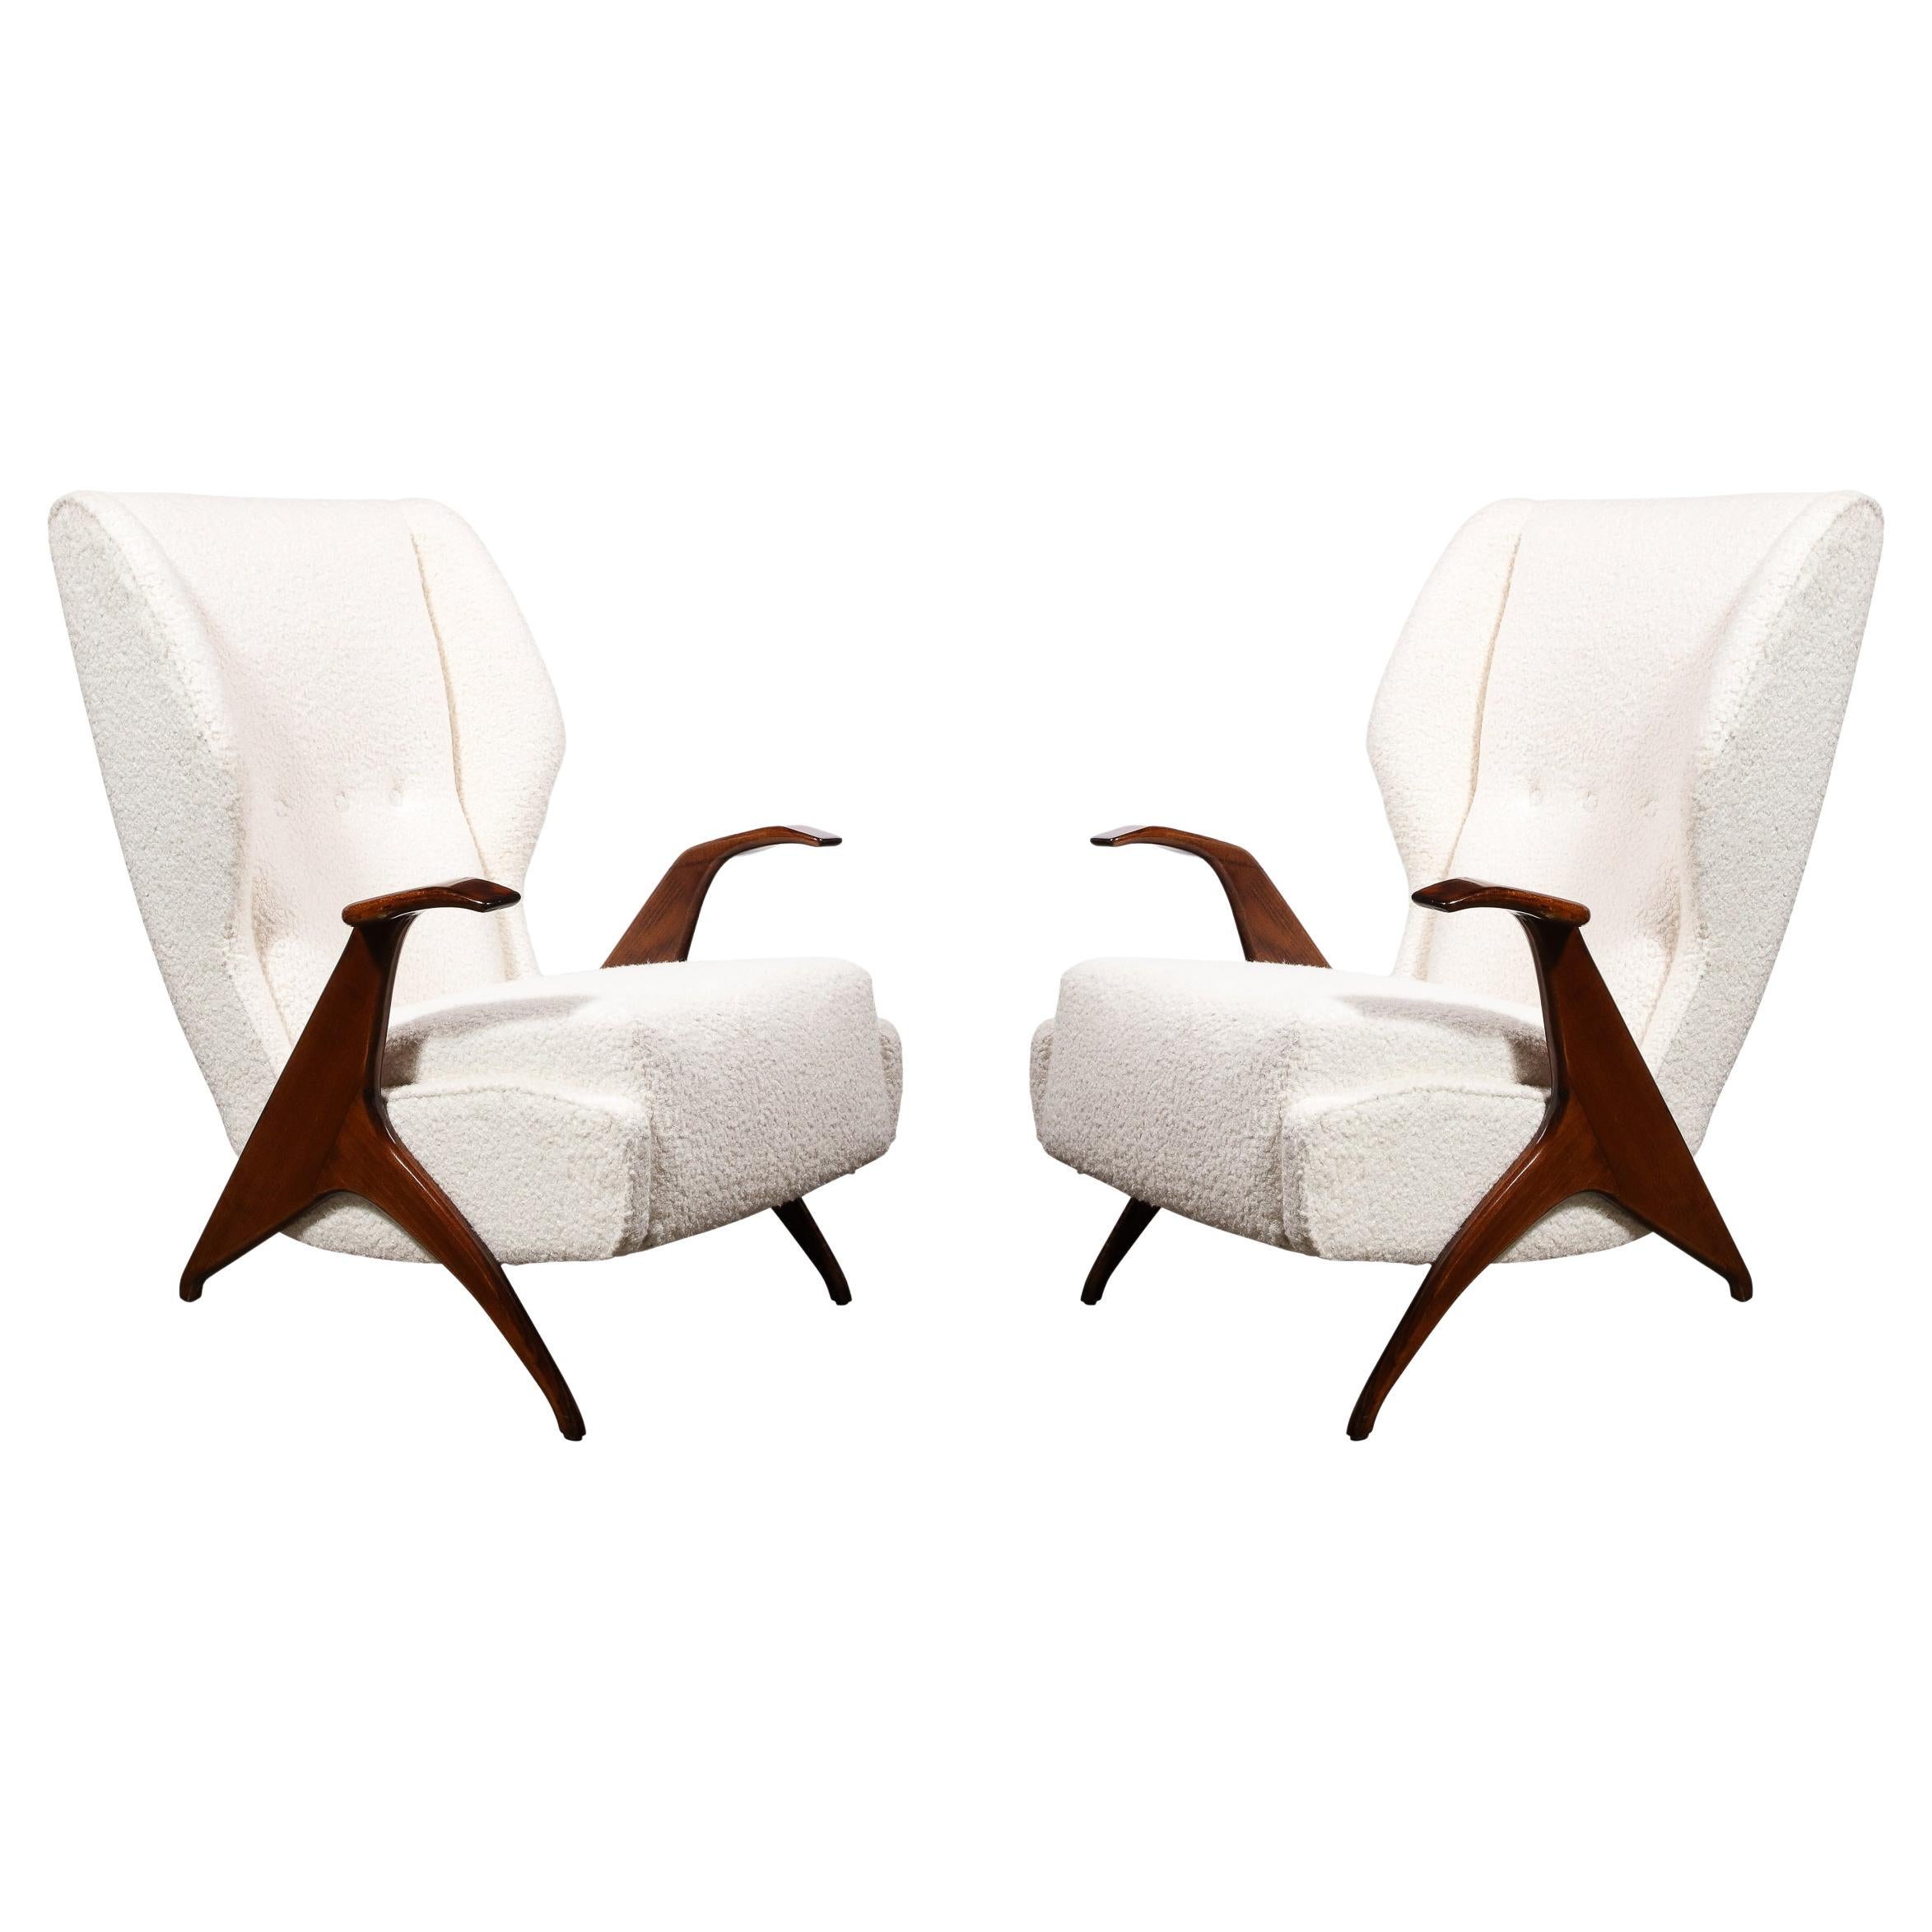 Mid-Century Modernist Sculptural Walnut Arm Chairs in Holly Hunt Boucle Fabric